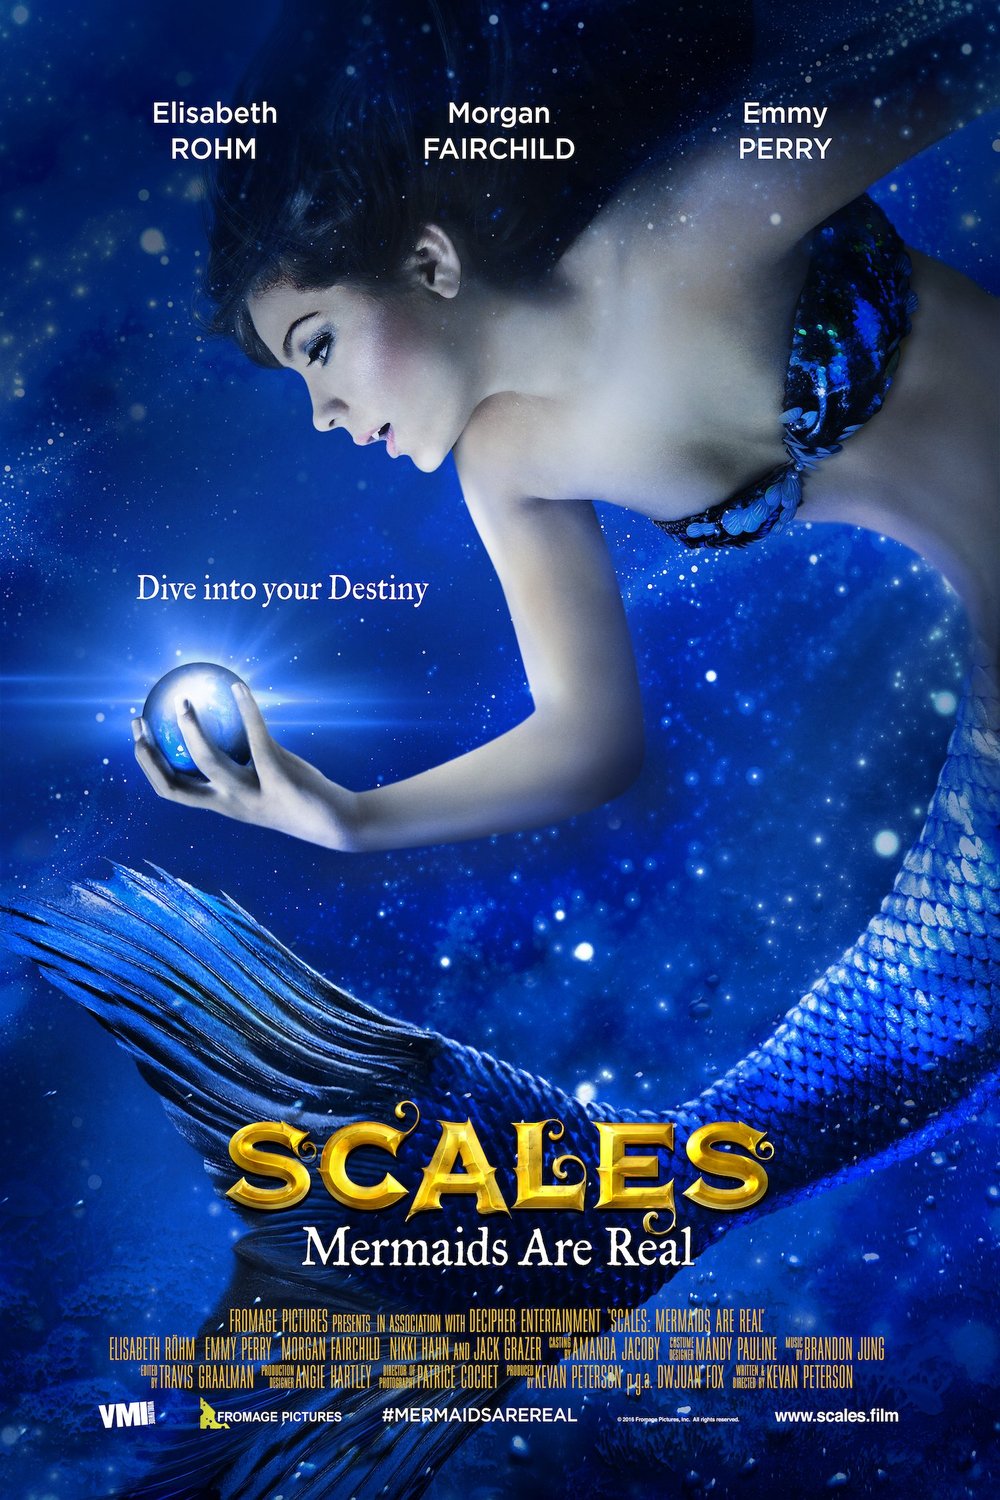 L'affiche du film Scales: Mermaids Are Real